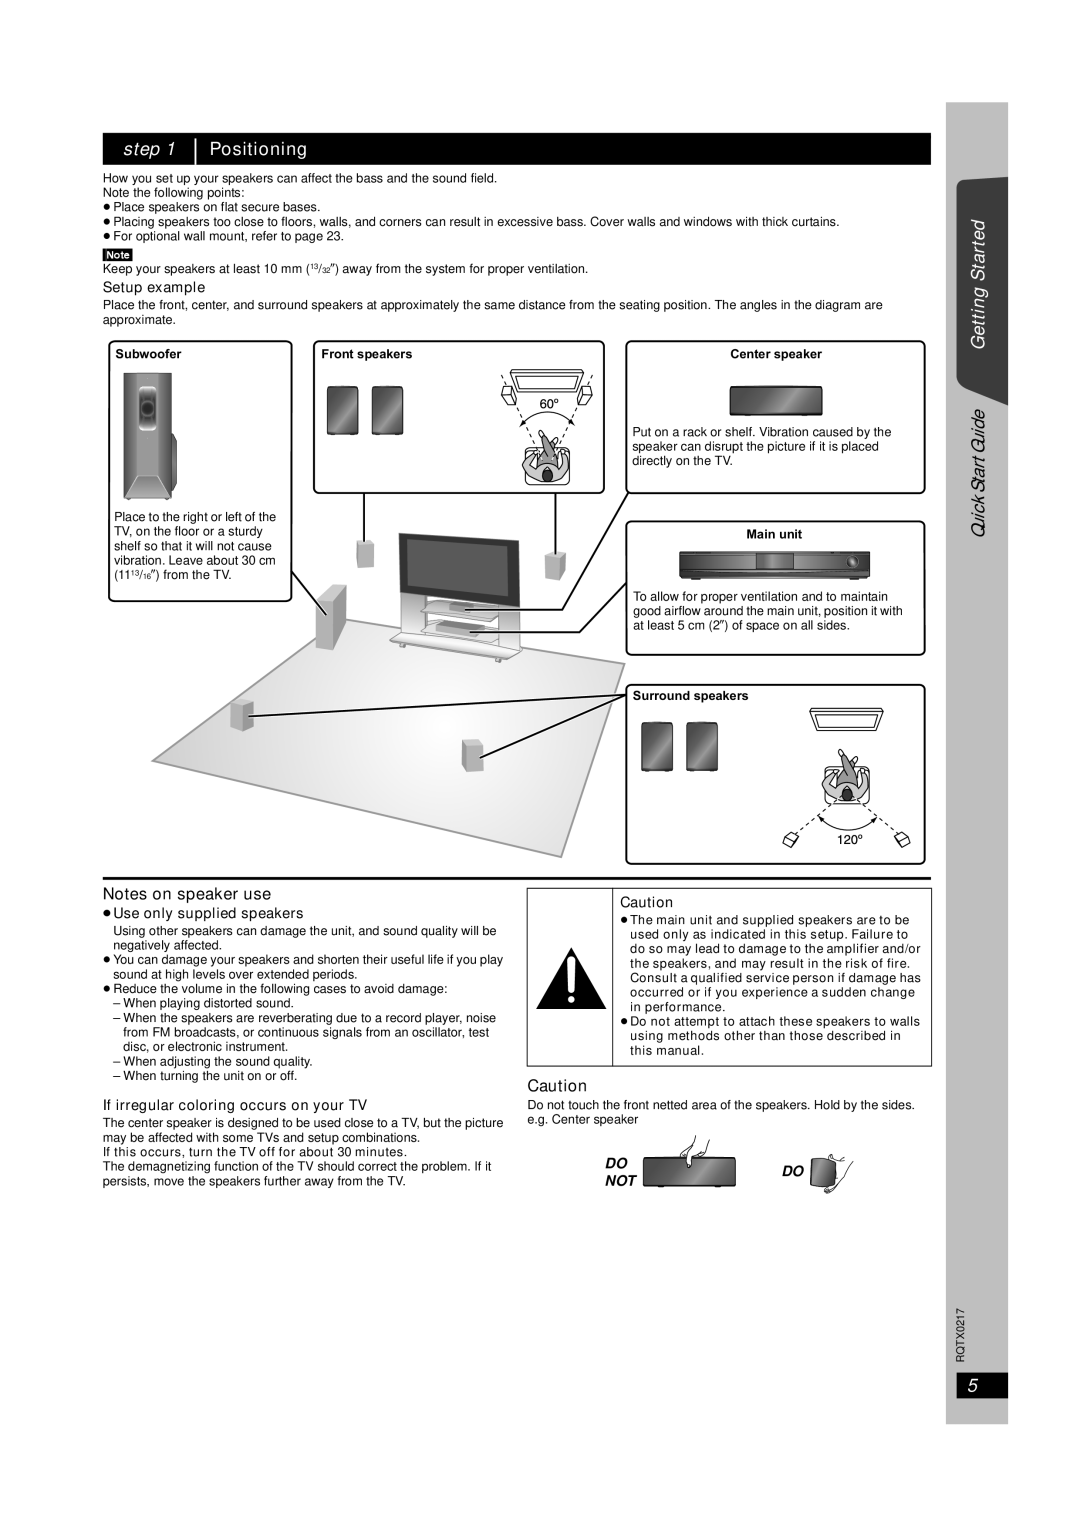 Panasonic SC-PT464 manual step, Positioning, Quick Start Guide Getting Started, Do Do Not 